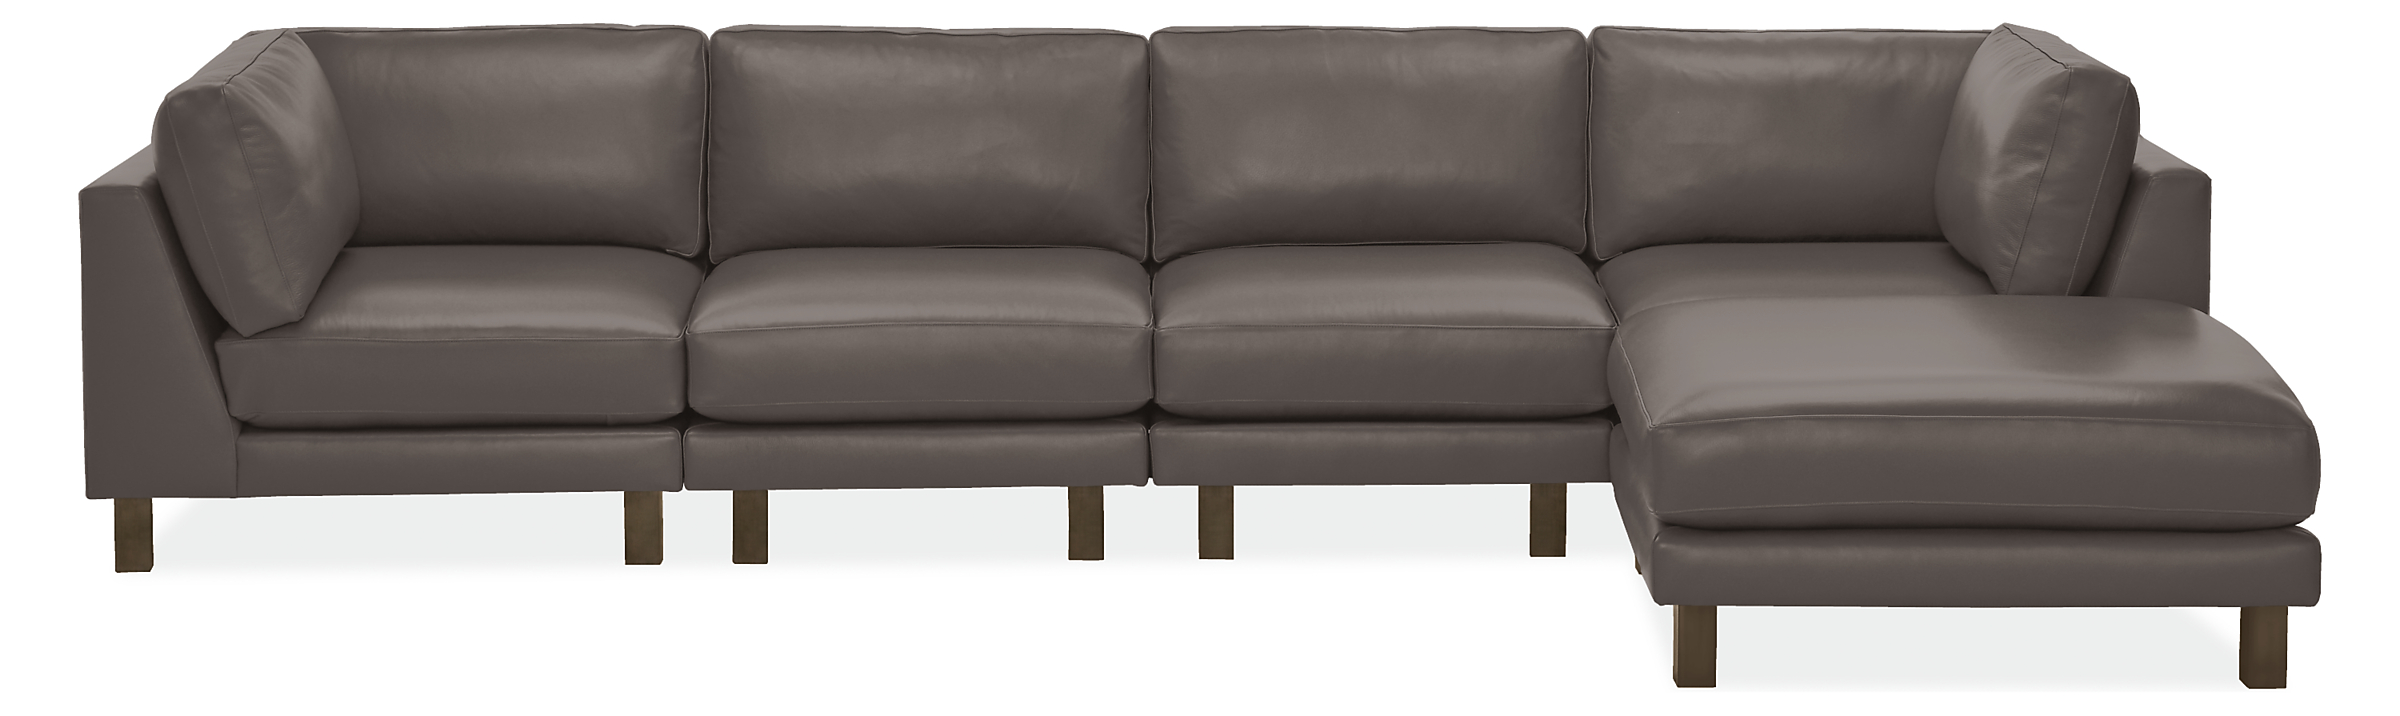 Cade Leather Modular Sectionals